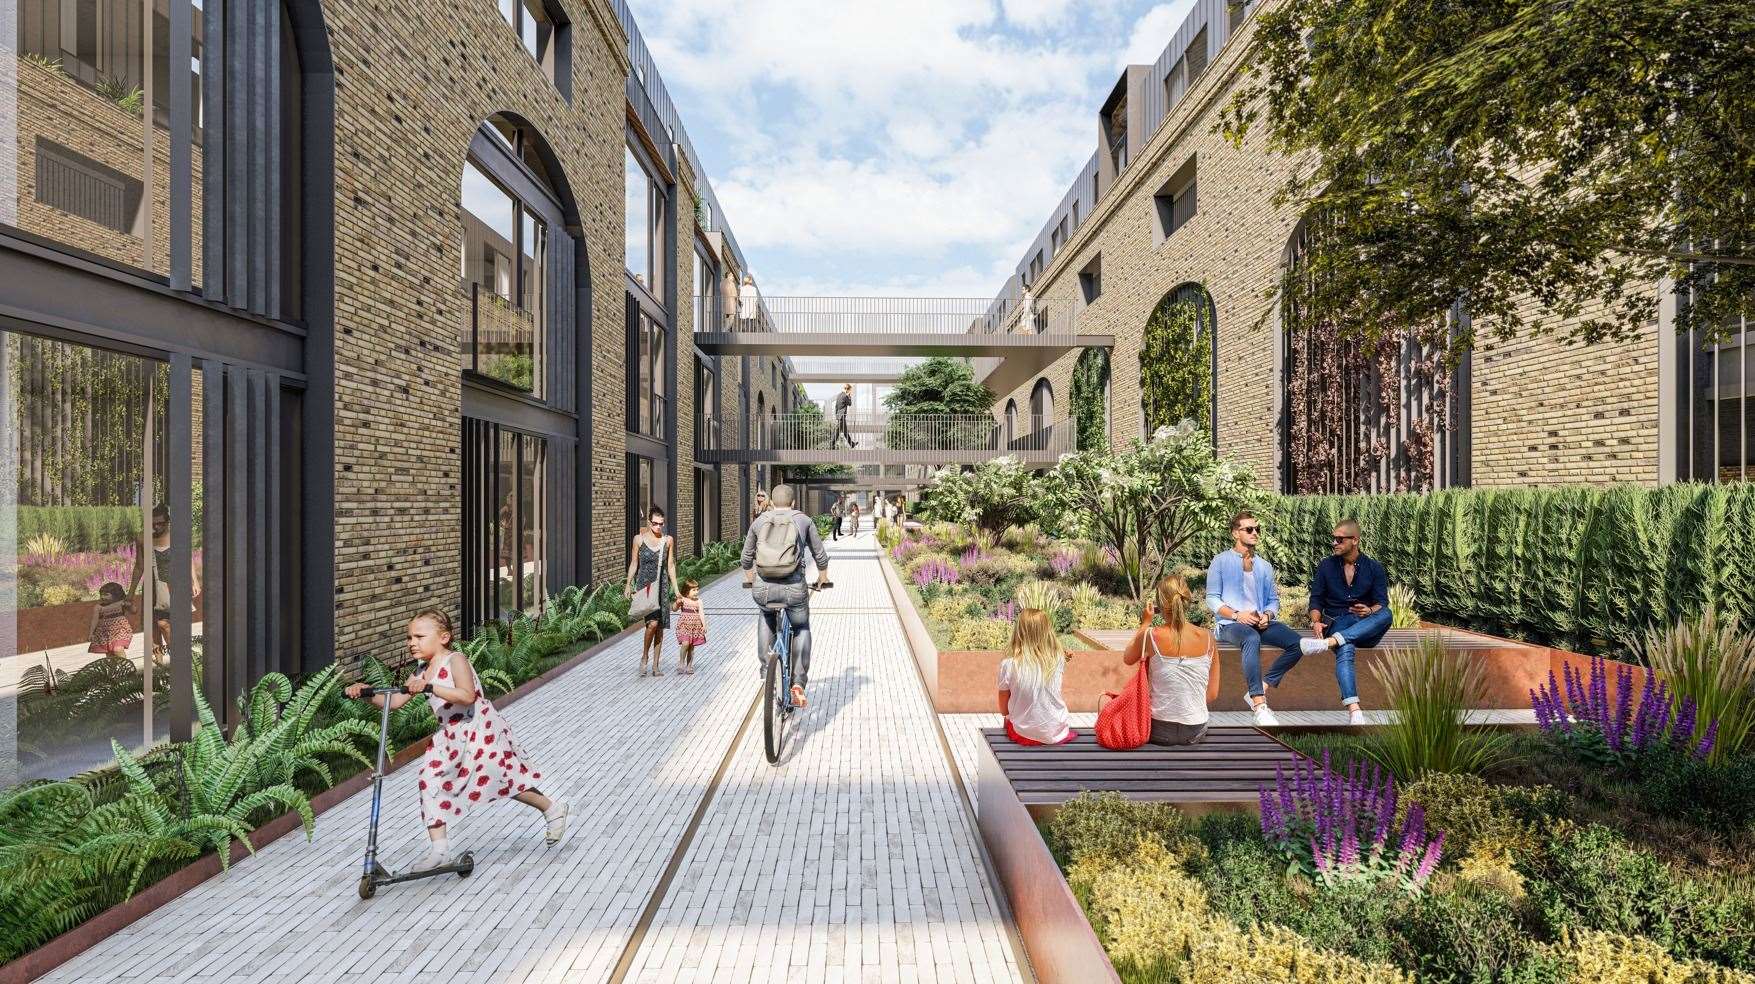 Quinn Estates gained planning permission in 2020 for the project